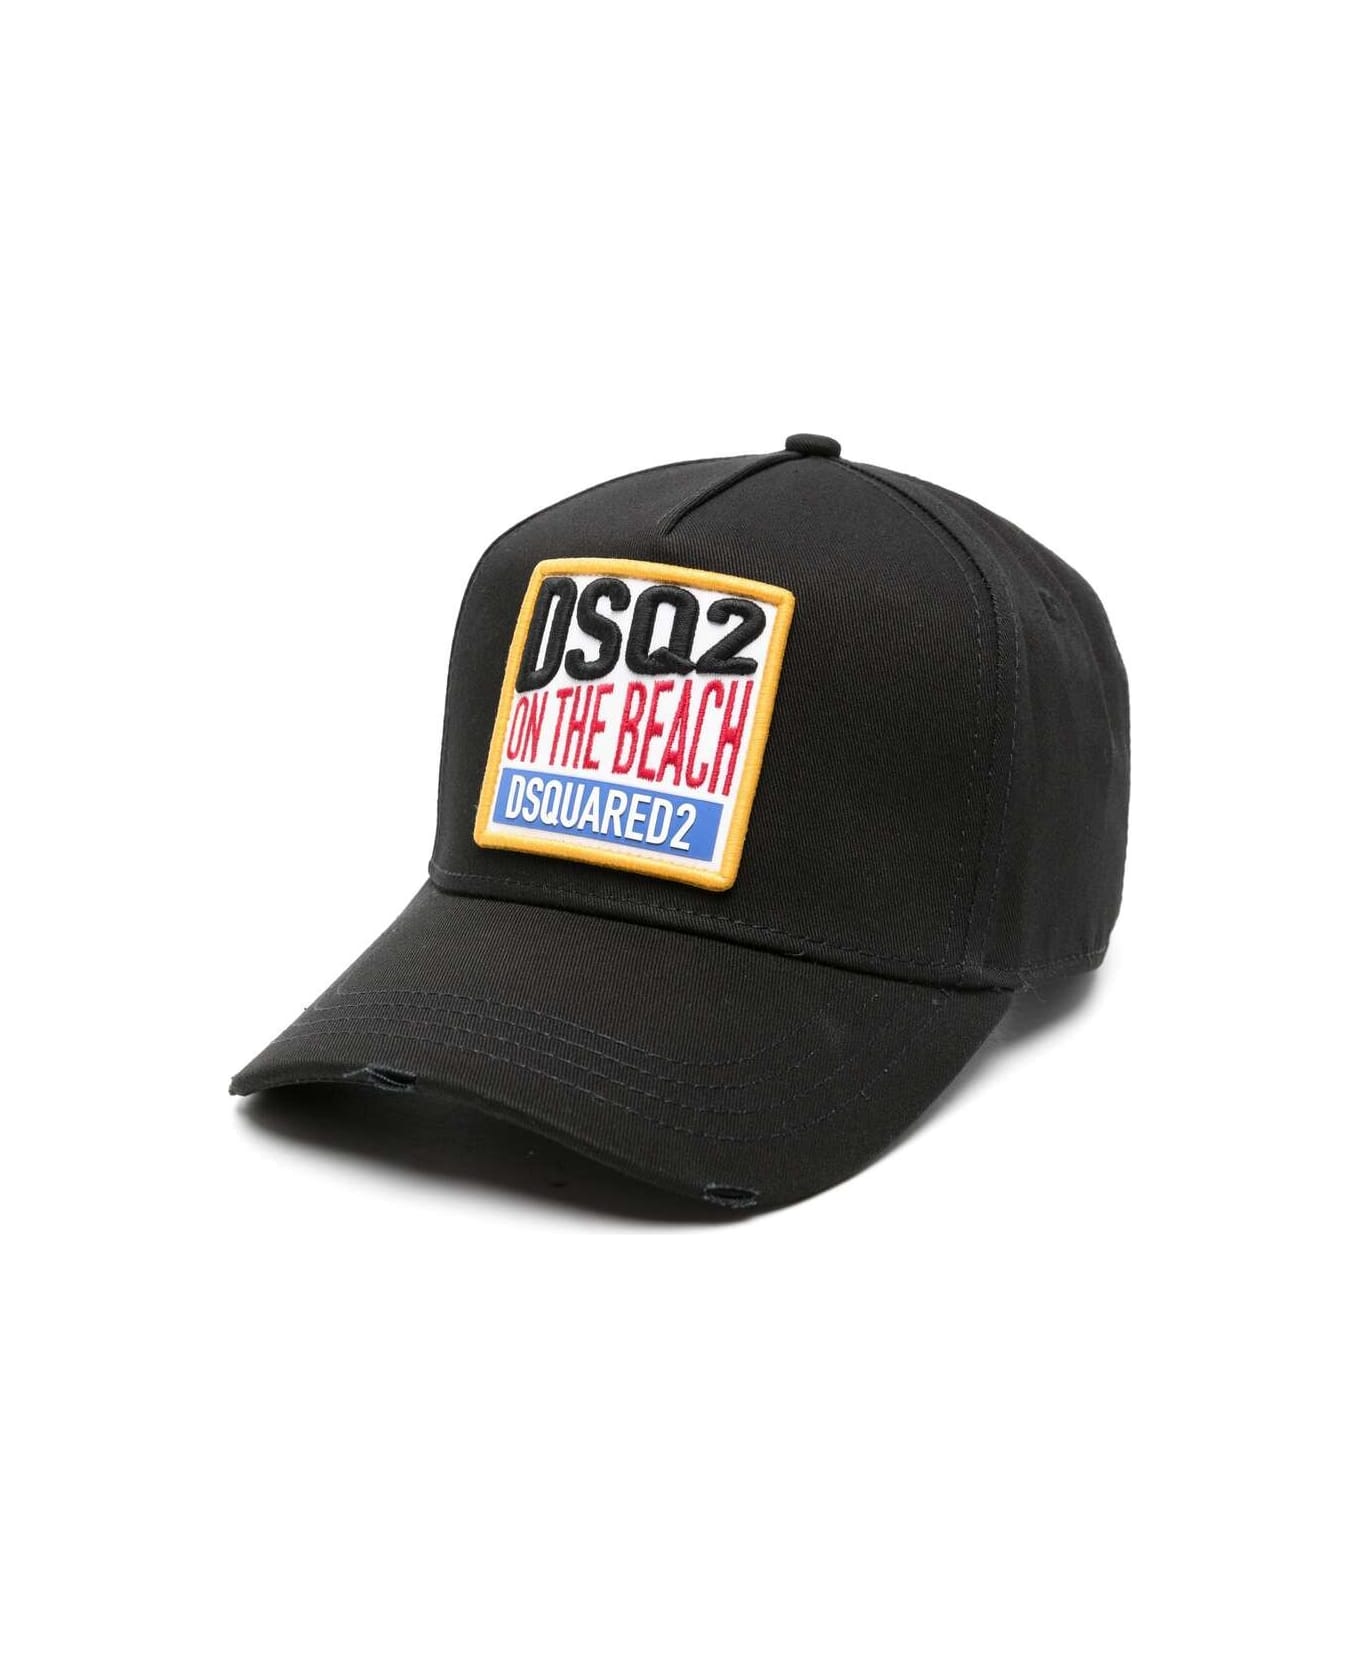 Dsquared2 Black Baseball Hat With Dsq2 On The Beach Patch - Black